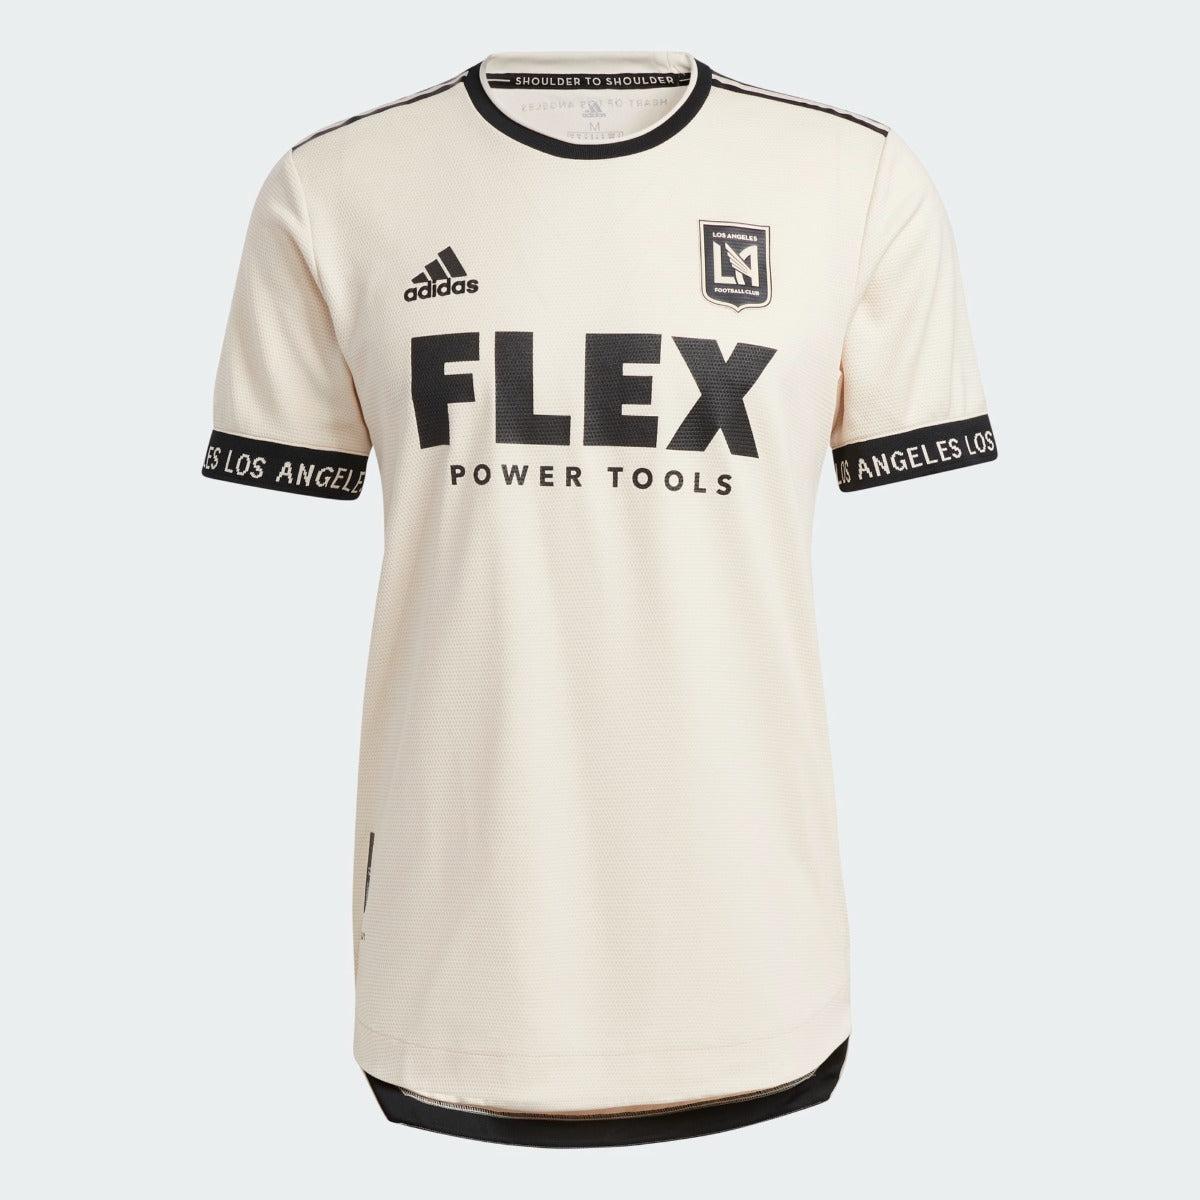 ADIDAS MLS LAFC LOS ANGELES FC Youth JERSEY. Size SMALL. New With Tags